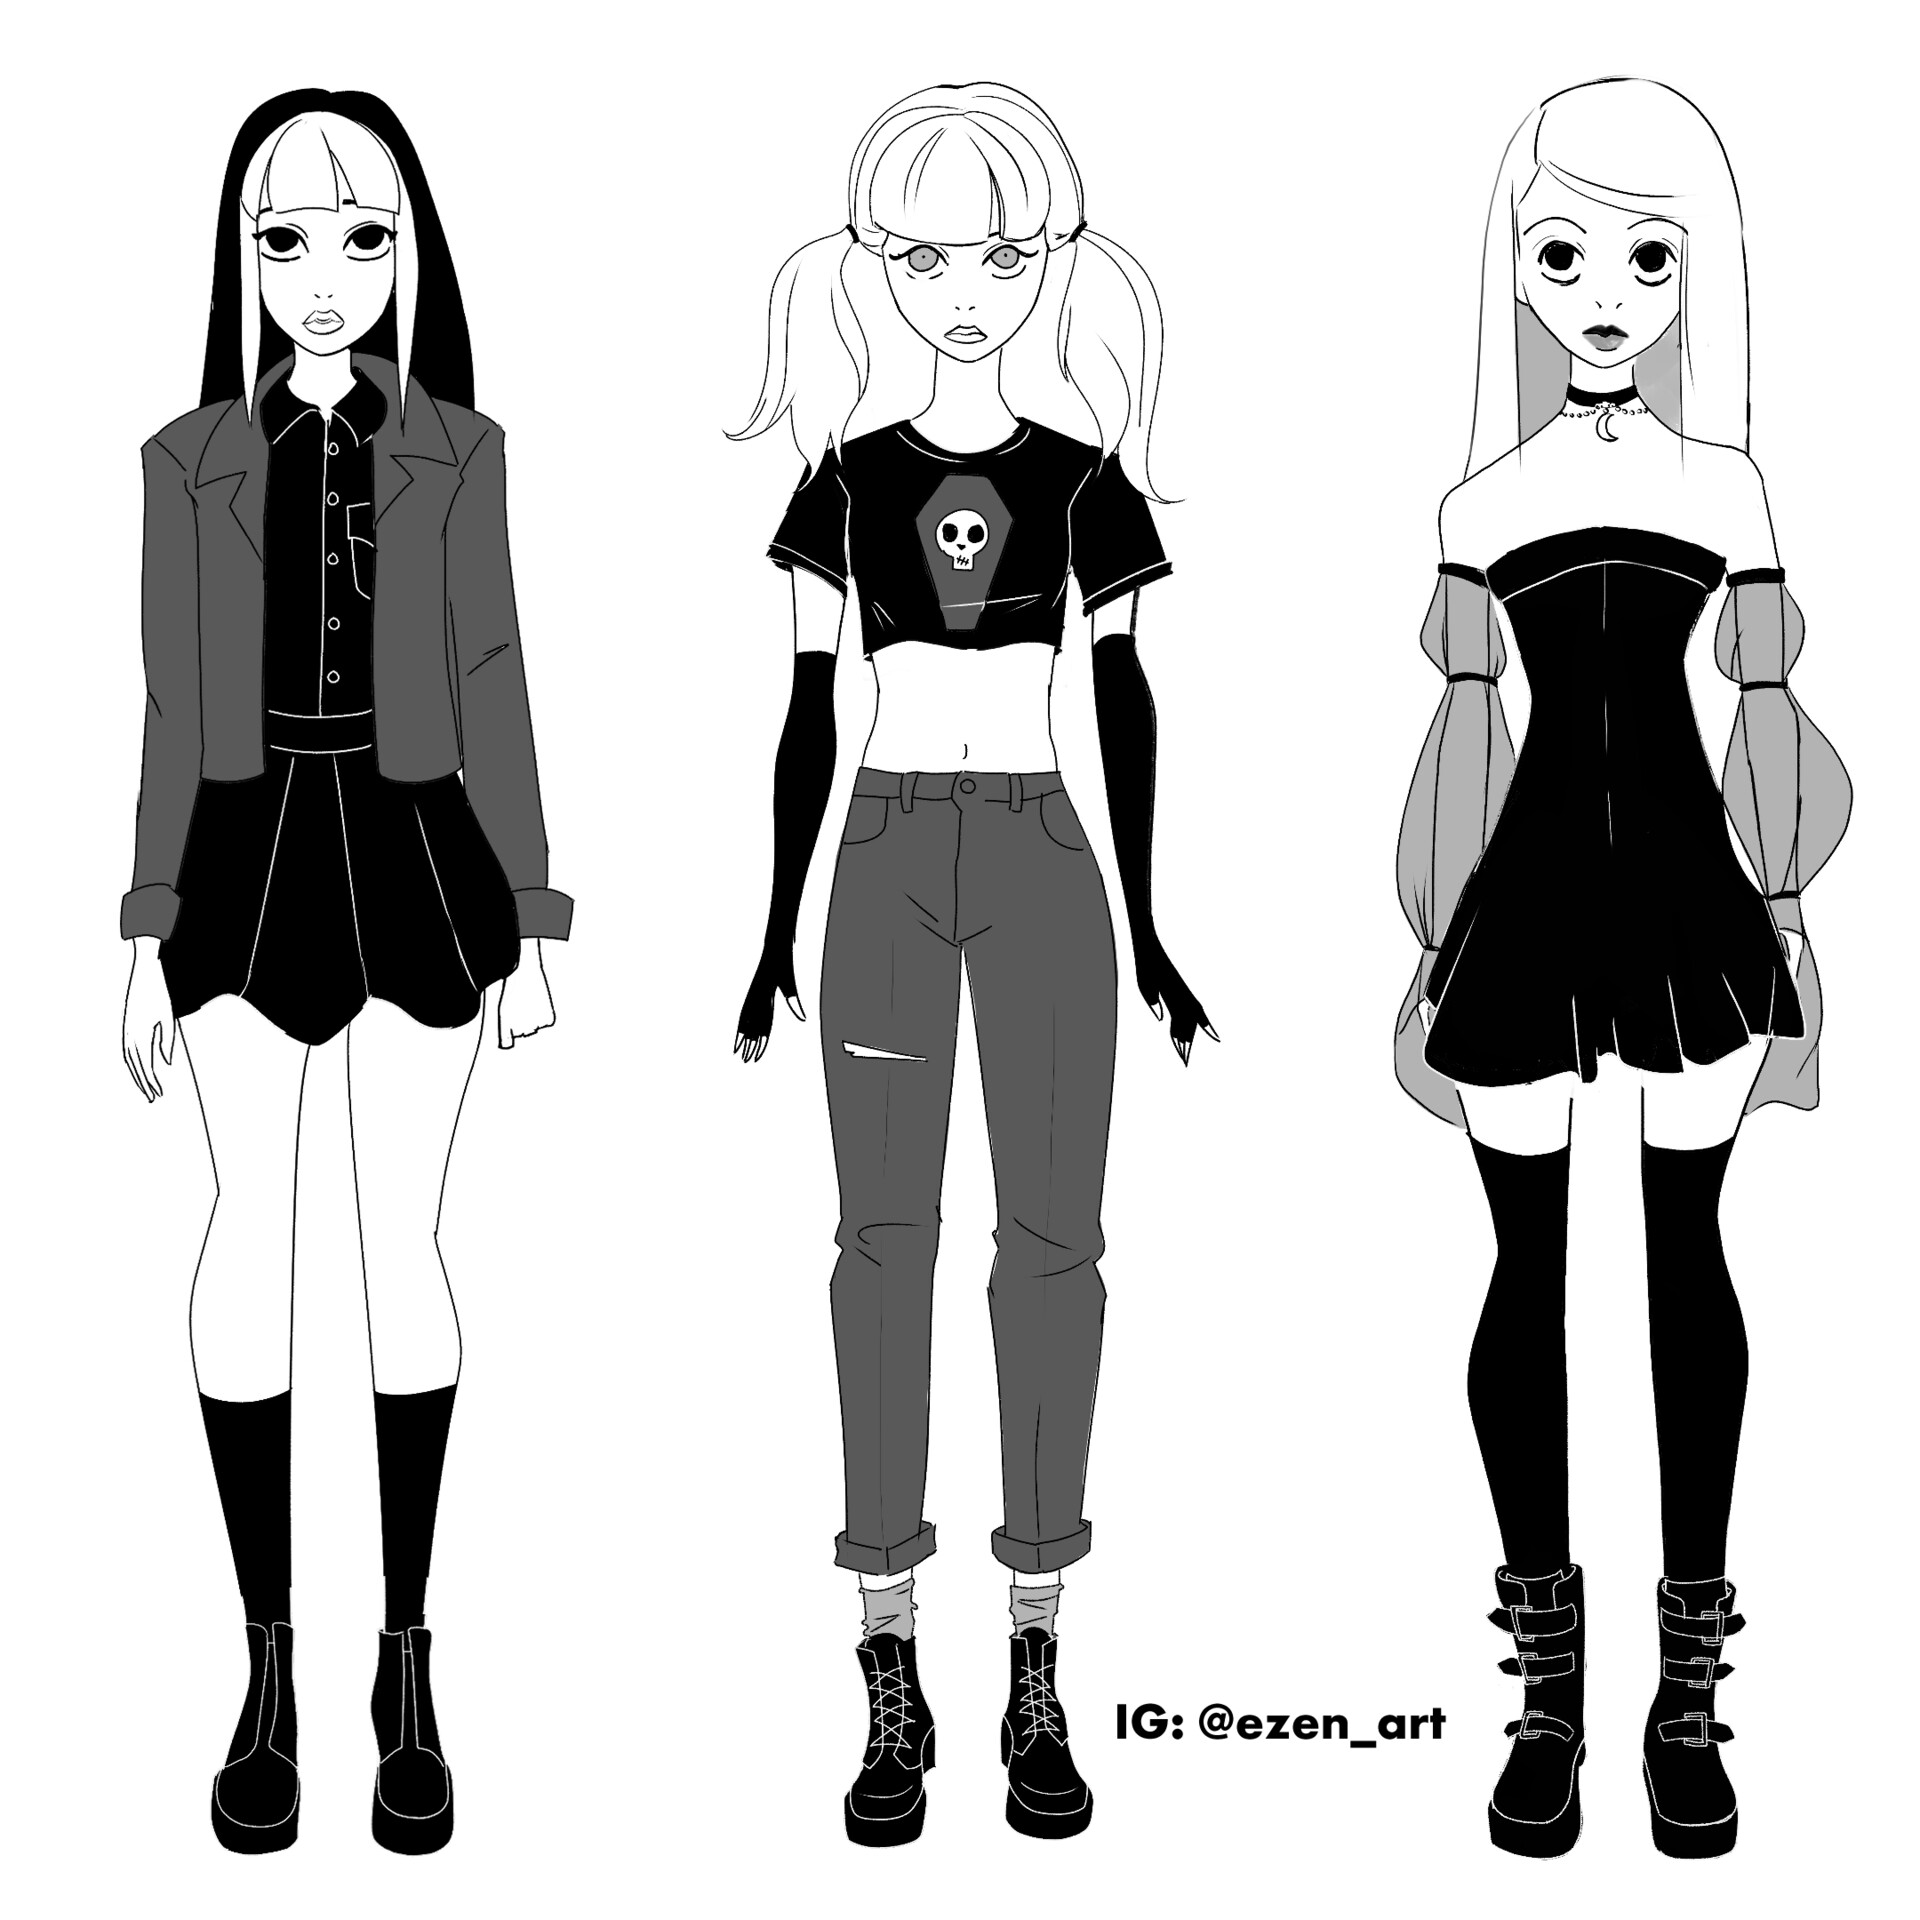 ArtStation - Outfit Iterations